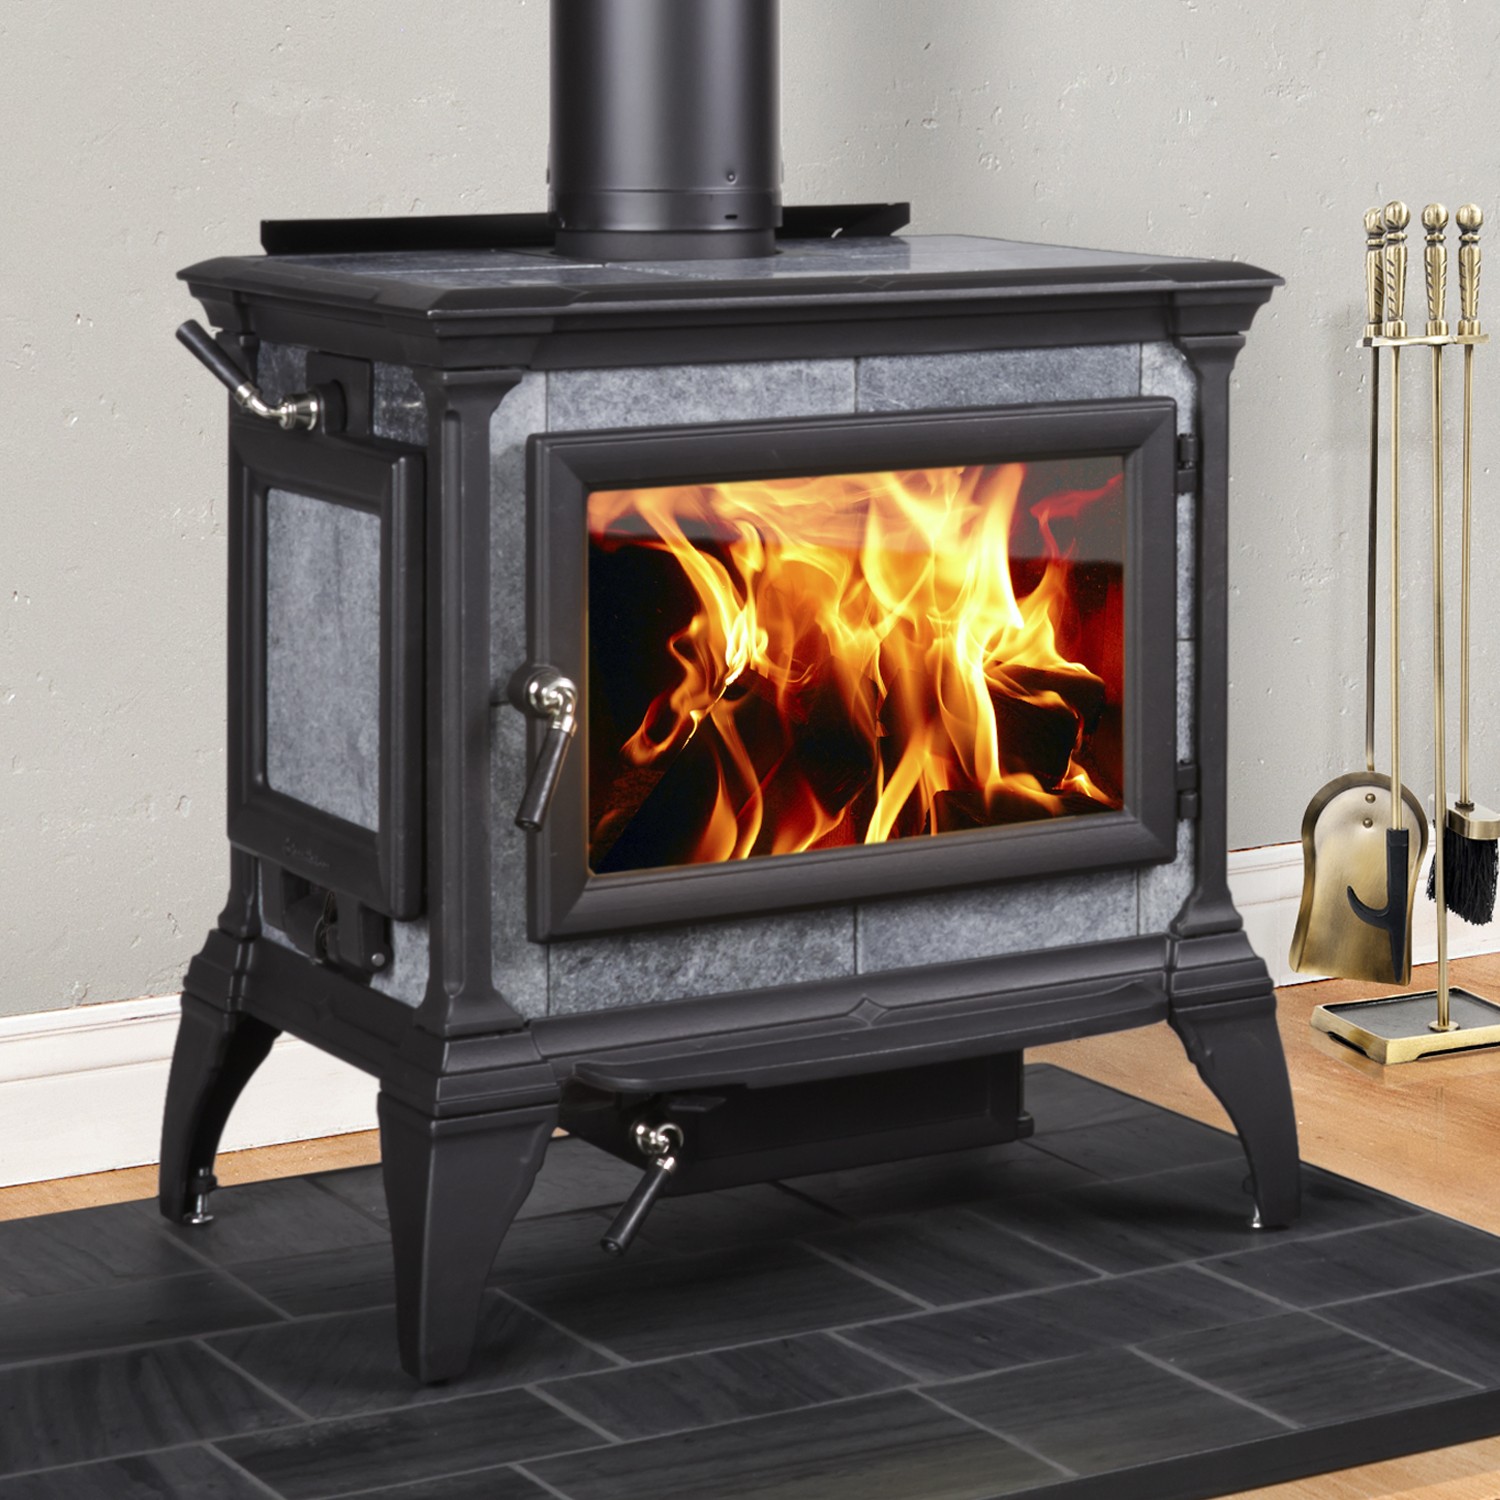 Does A Wood Stove Need A Hearth